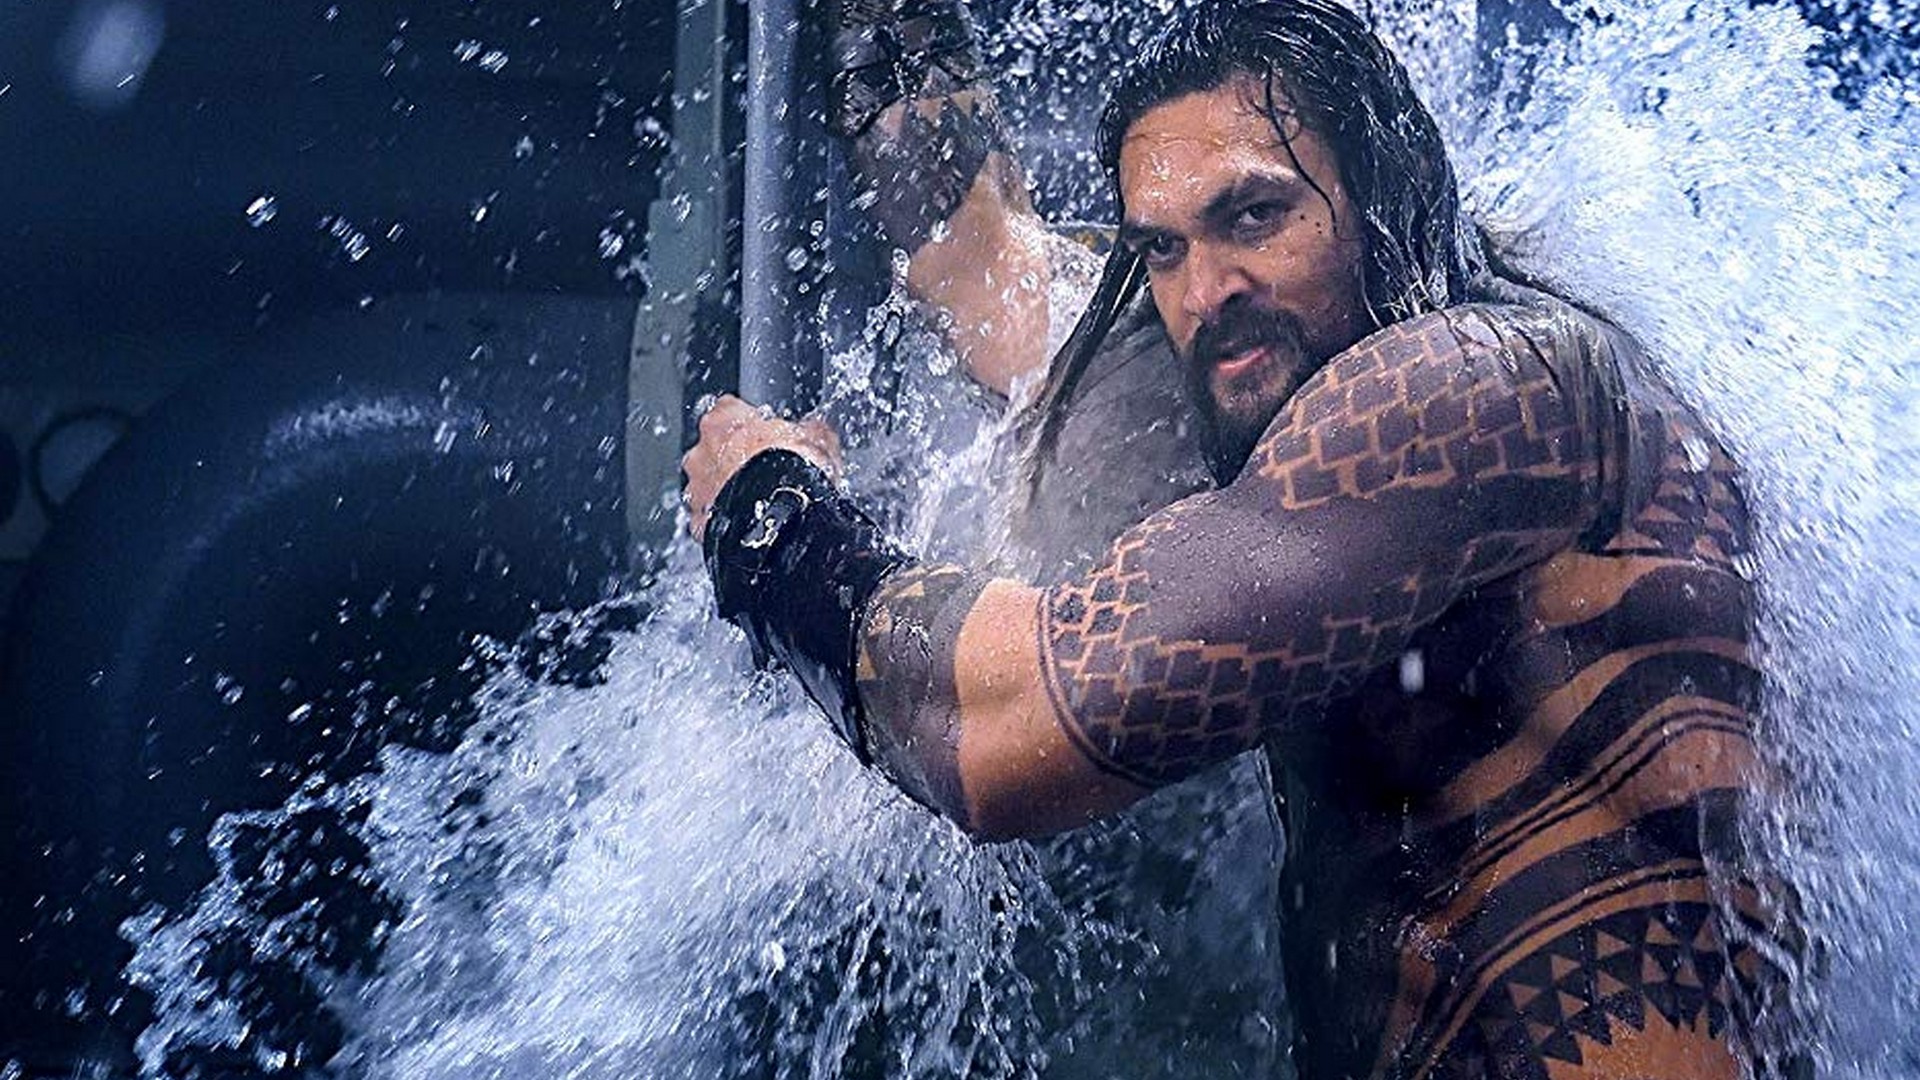 Best Aquaman Wallpaper HD With Resolution 1920X1080 pixel. You can make this wallpaper for your Desktop Computer Backgrounds, Mac Wallpapers, Android Lock screen or iPhone Screensavers